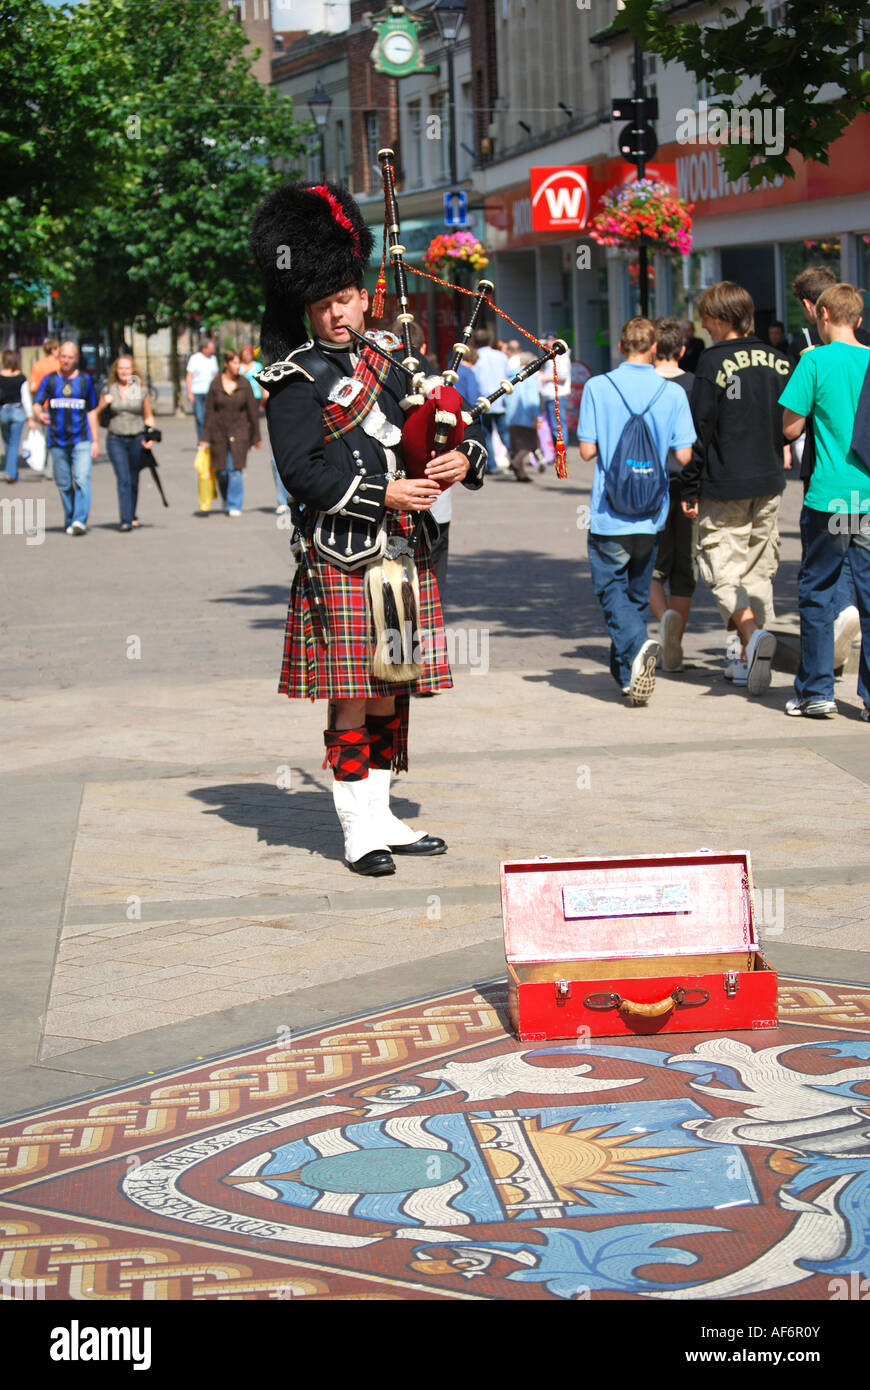 Scottish bagpipe player playing in High Street, Staines-upon-Thames, Middlesex, England, United Kingdom Stock Photo